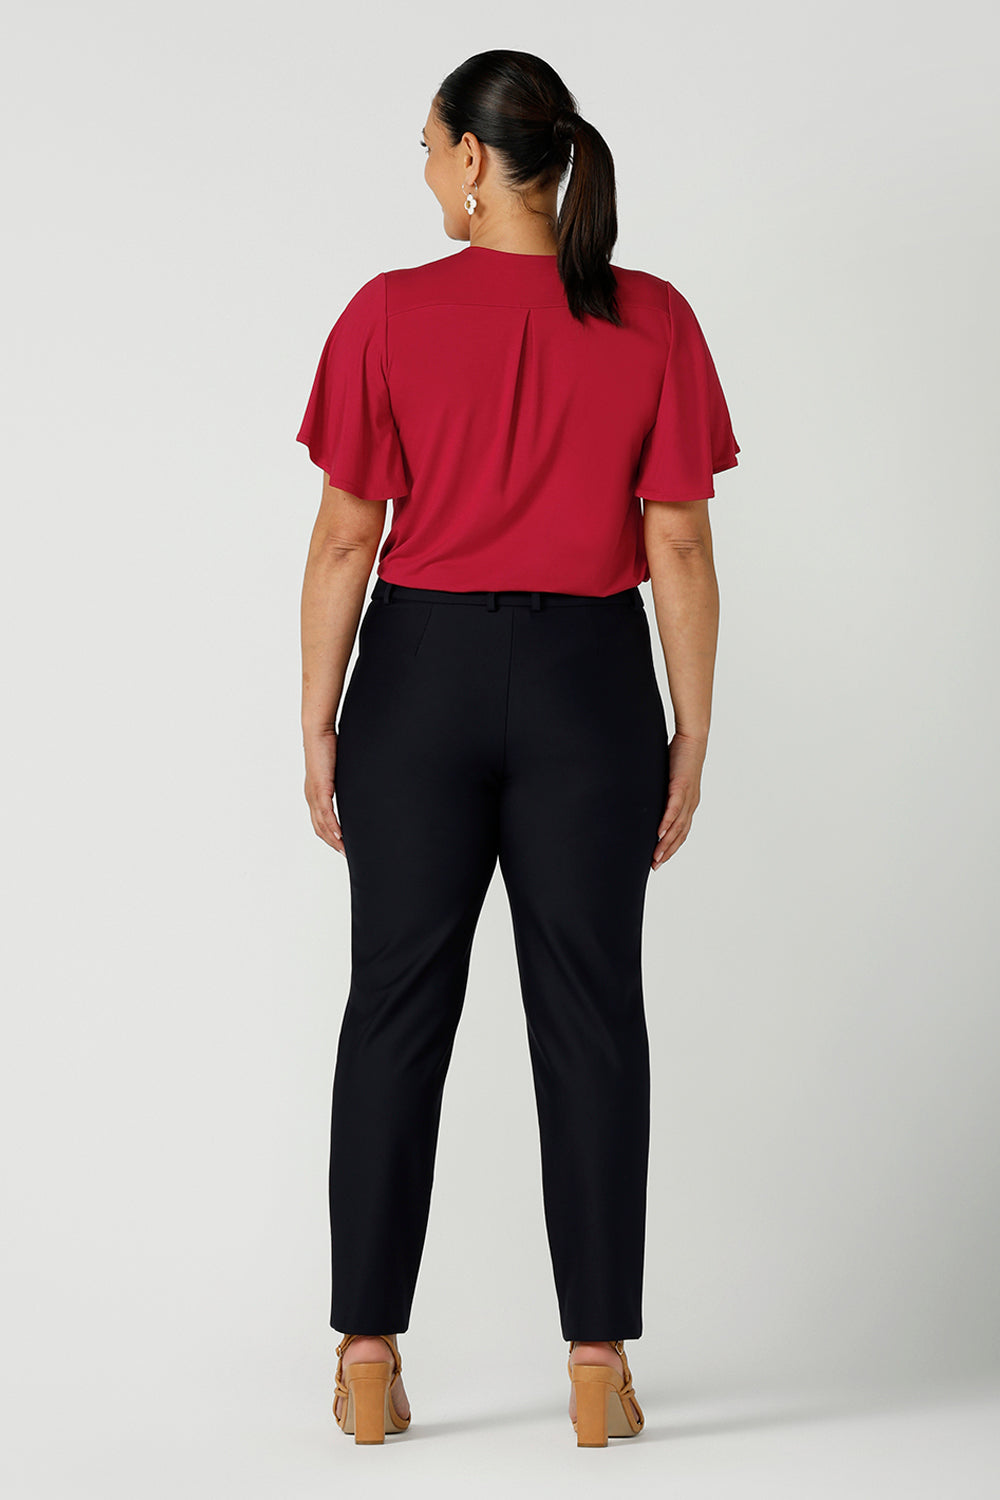 Back view of a size 12 woman wears Lulu cigarette pants in navy ponte with a matching jacket. A comfortable tailored work pant with fly front and belt loops. Styled back with a Lila top in red bamboo. A great office look for the festive season. Made in Australia for women sizes 8 - 24.